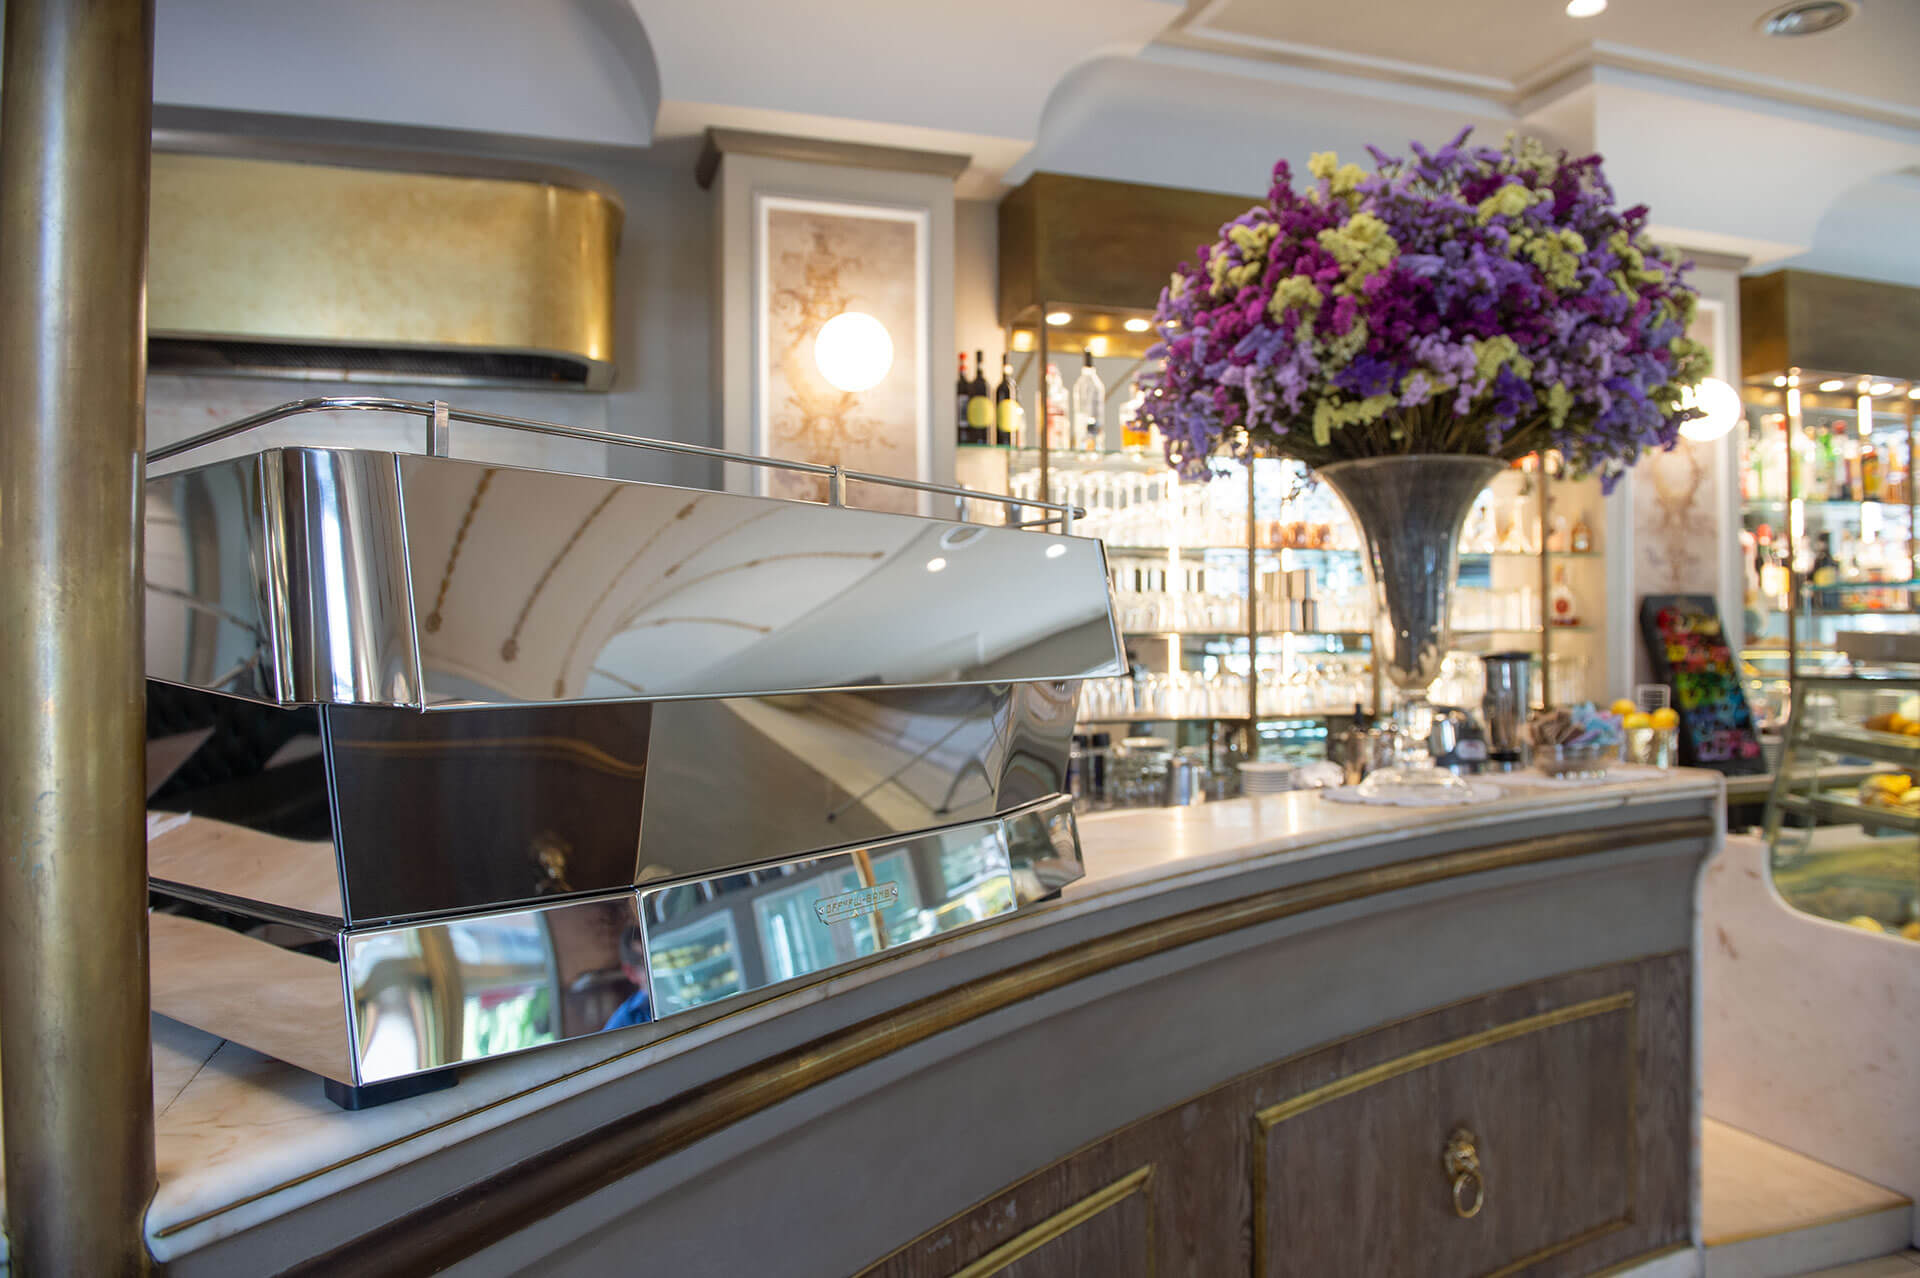 A polished OFB espresso machine on marble countertop next to a great bouquet of purple flowers